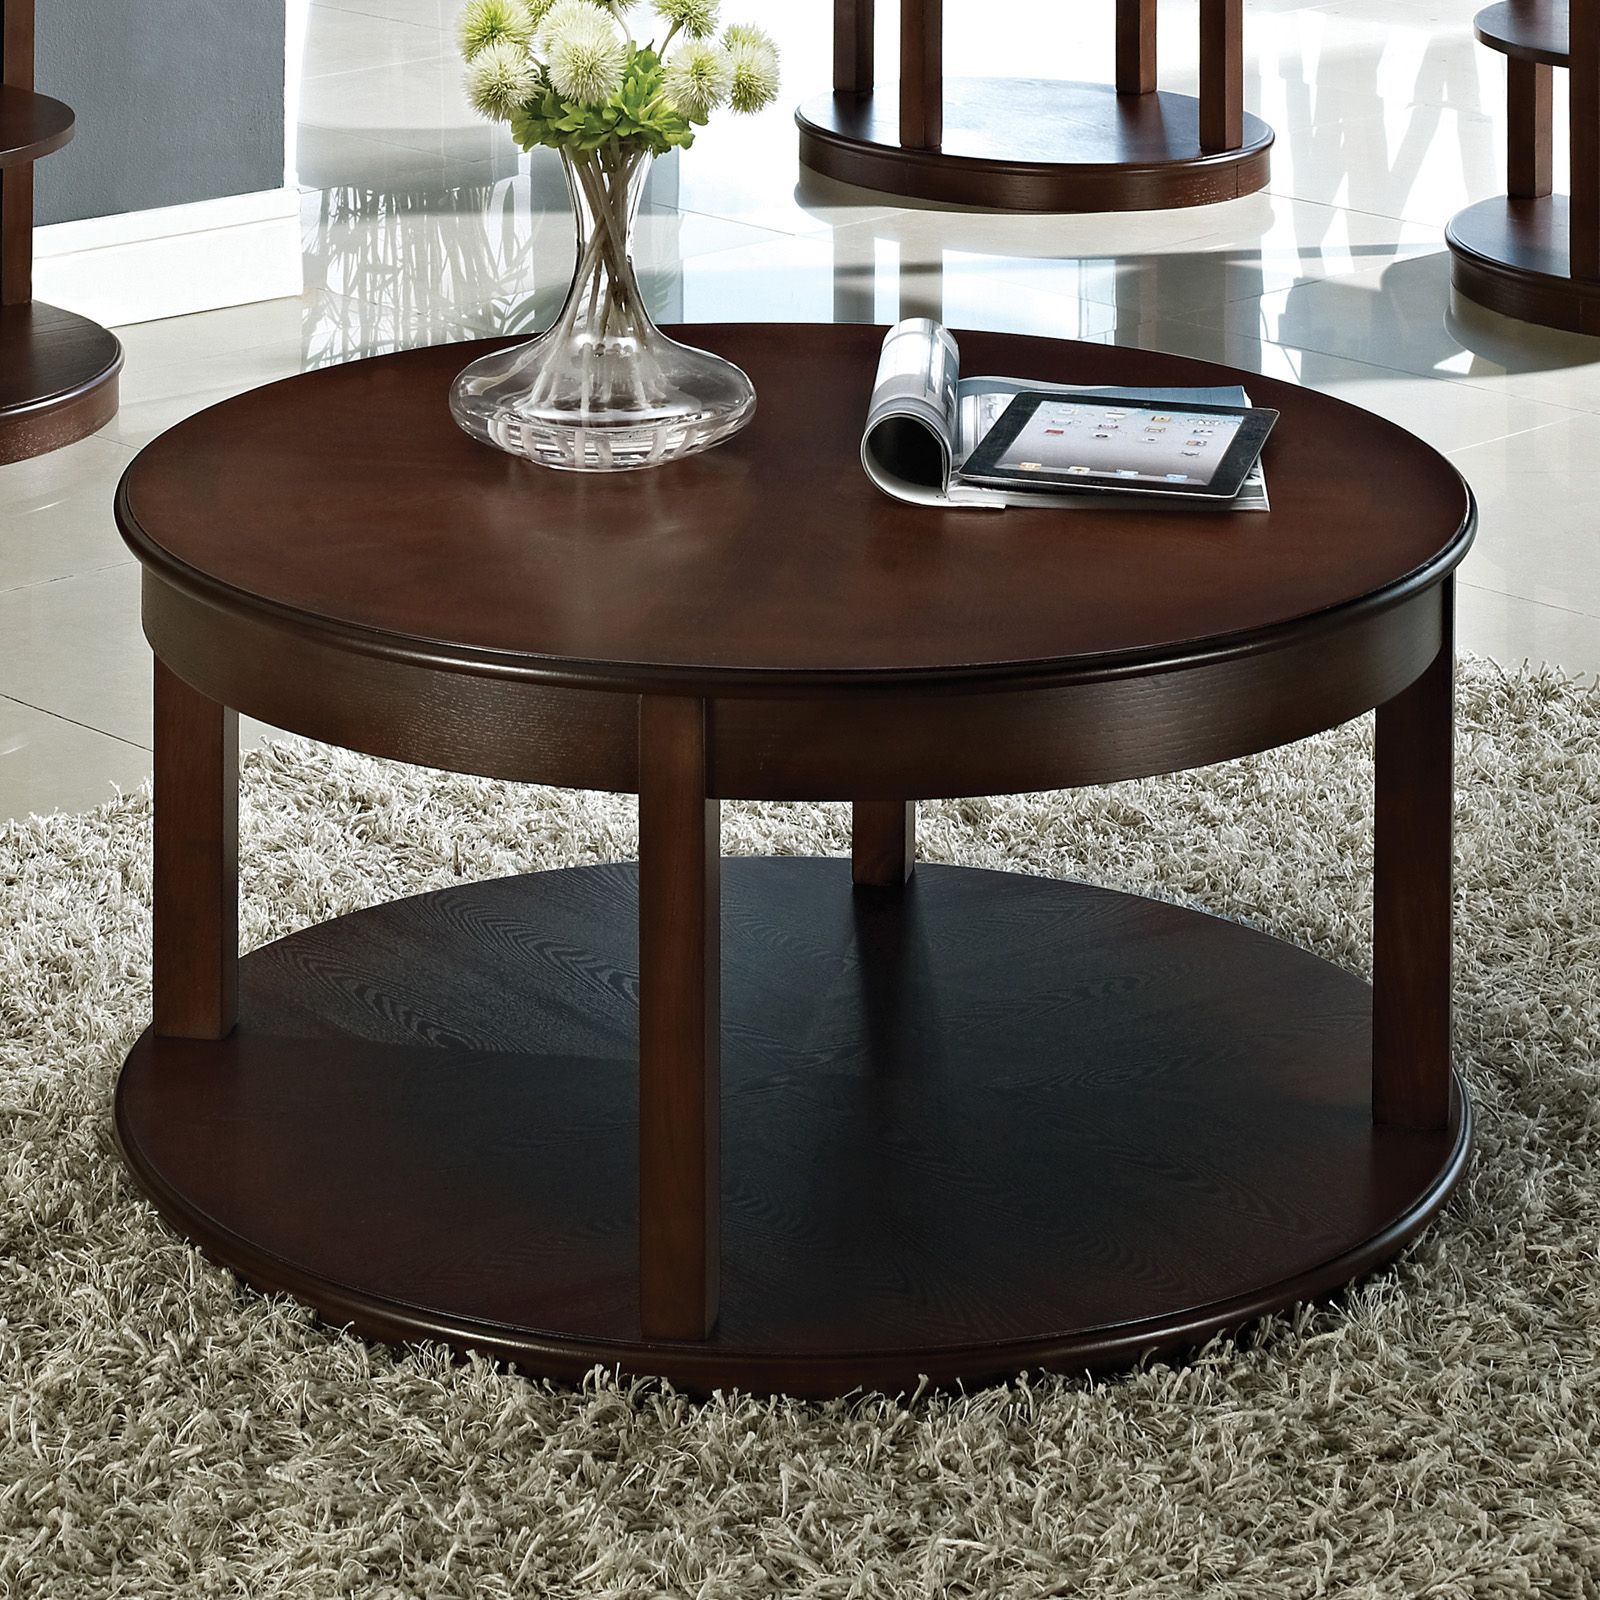 Steve Silver Crestview Round Espresso Wood Spinning Coffee Throughout Recent Silver Coffee Tables (View 3 of 20)